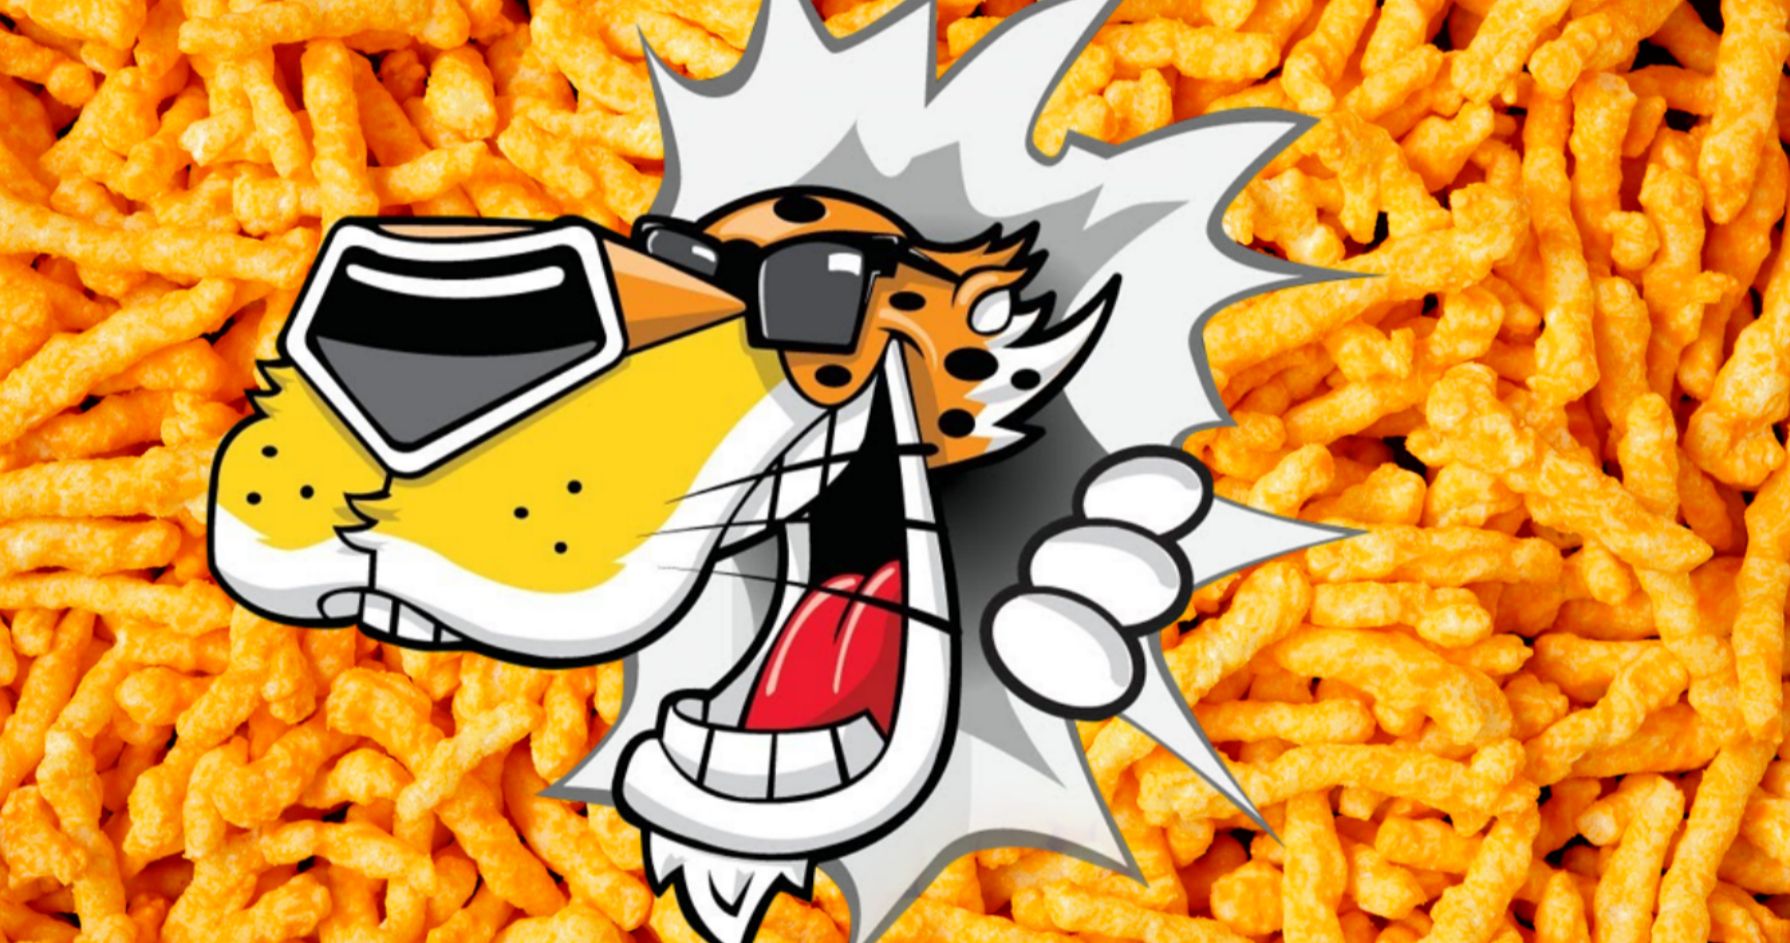 Cheeto Dust Gets an Official Name from Frito Lay